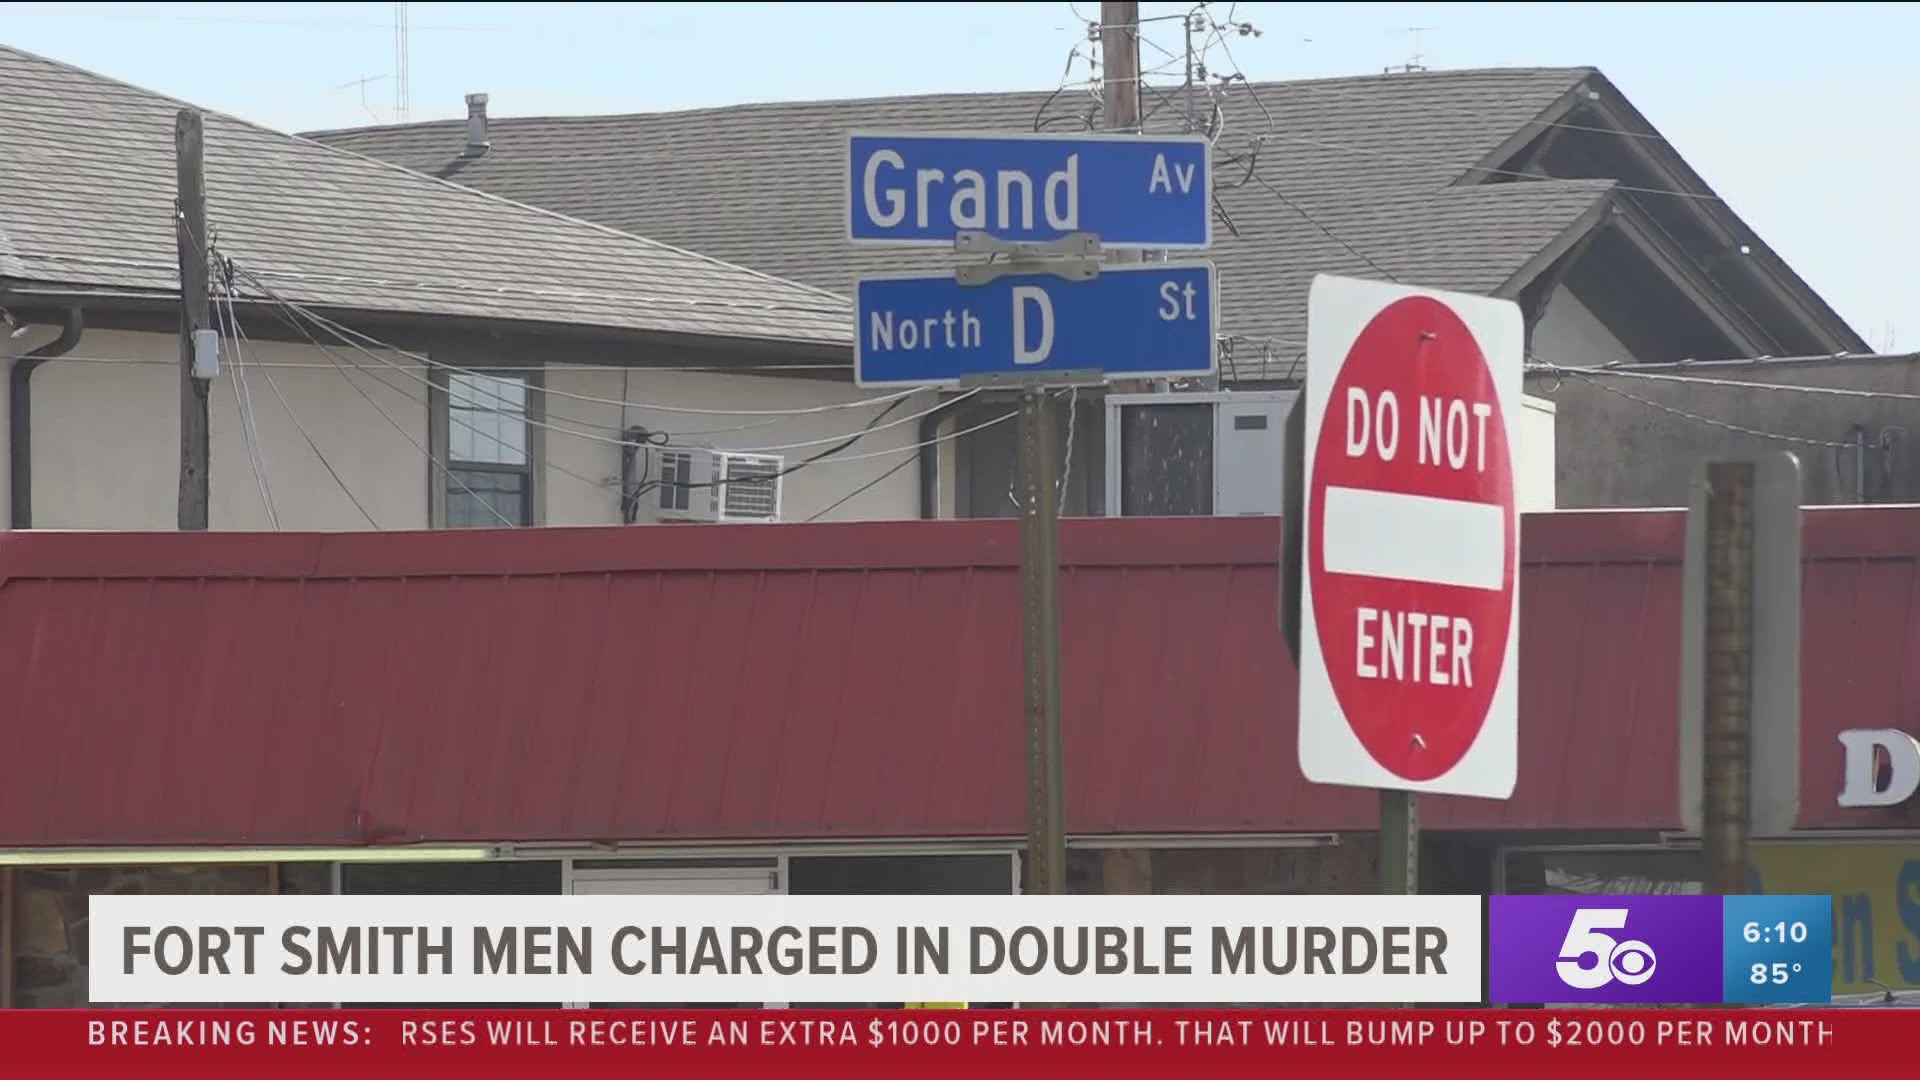 Fort Smith men charged in double murder